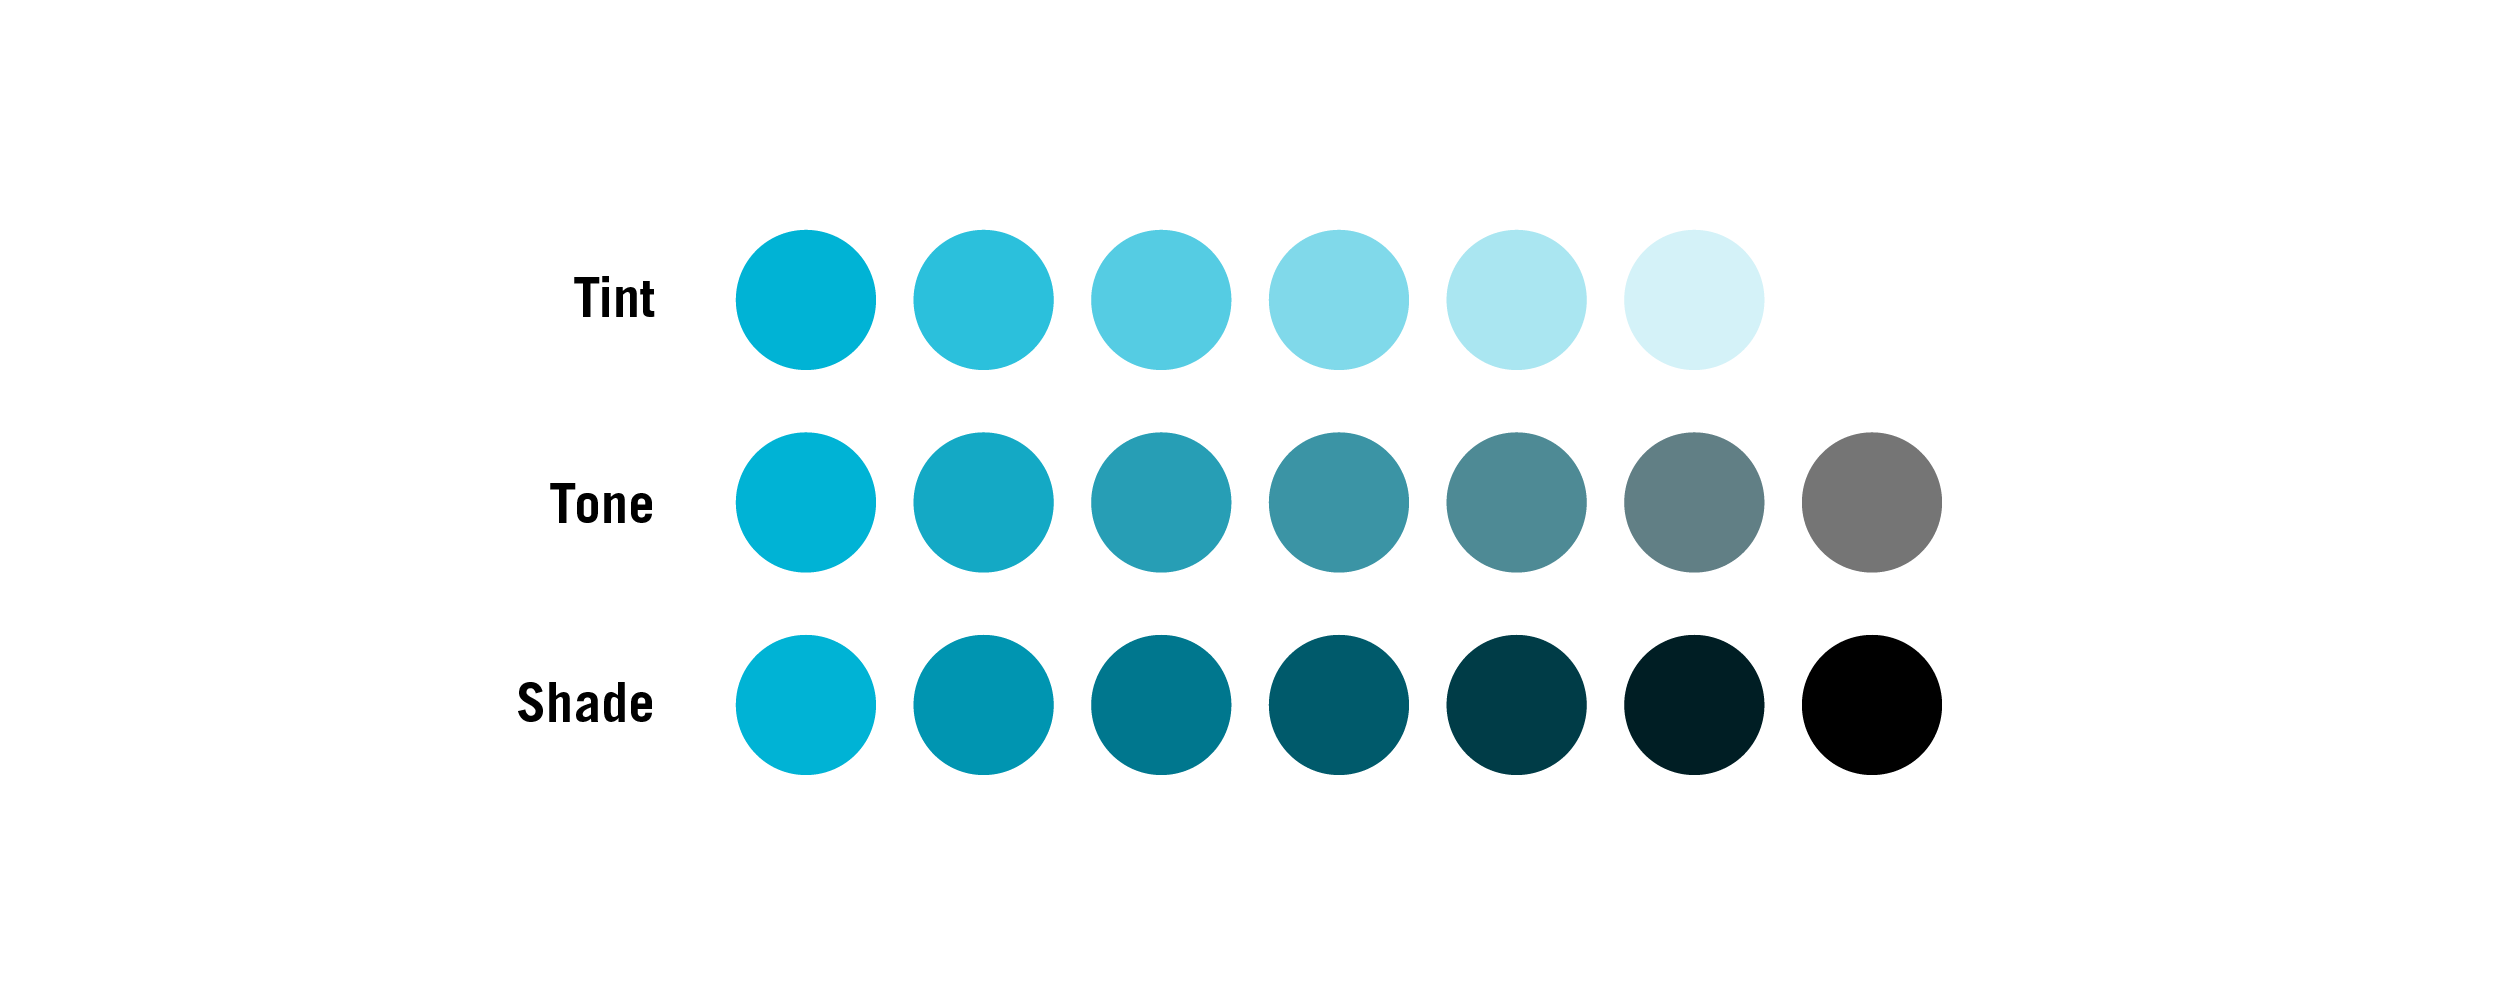 Tint, tone and shade shown with blue dots